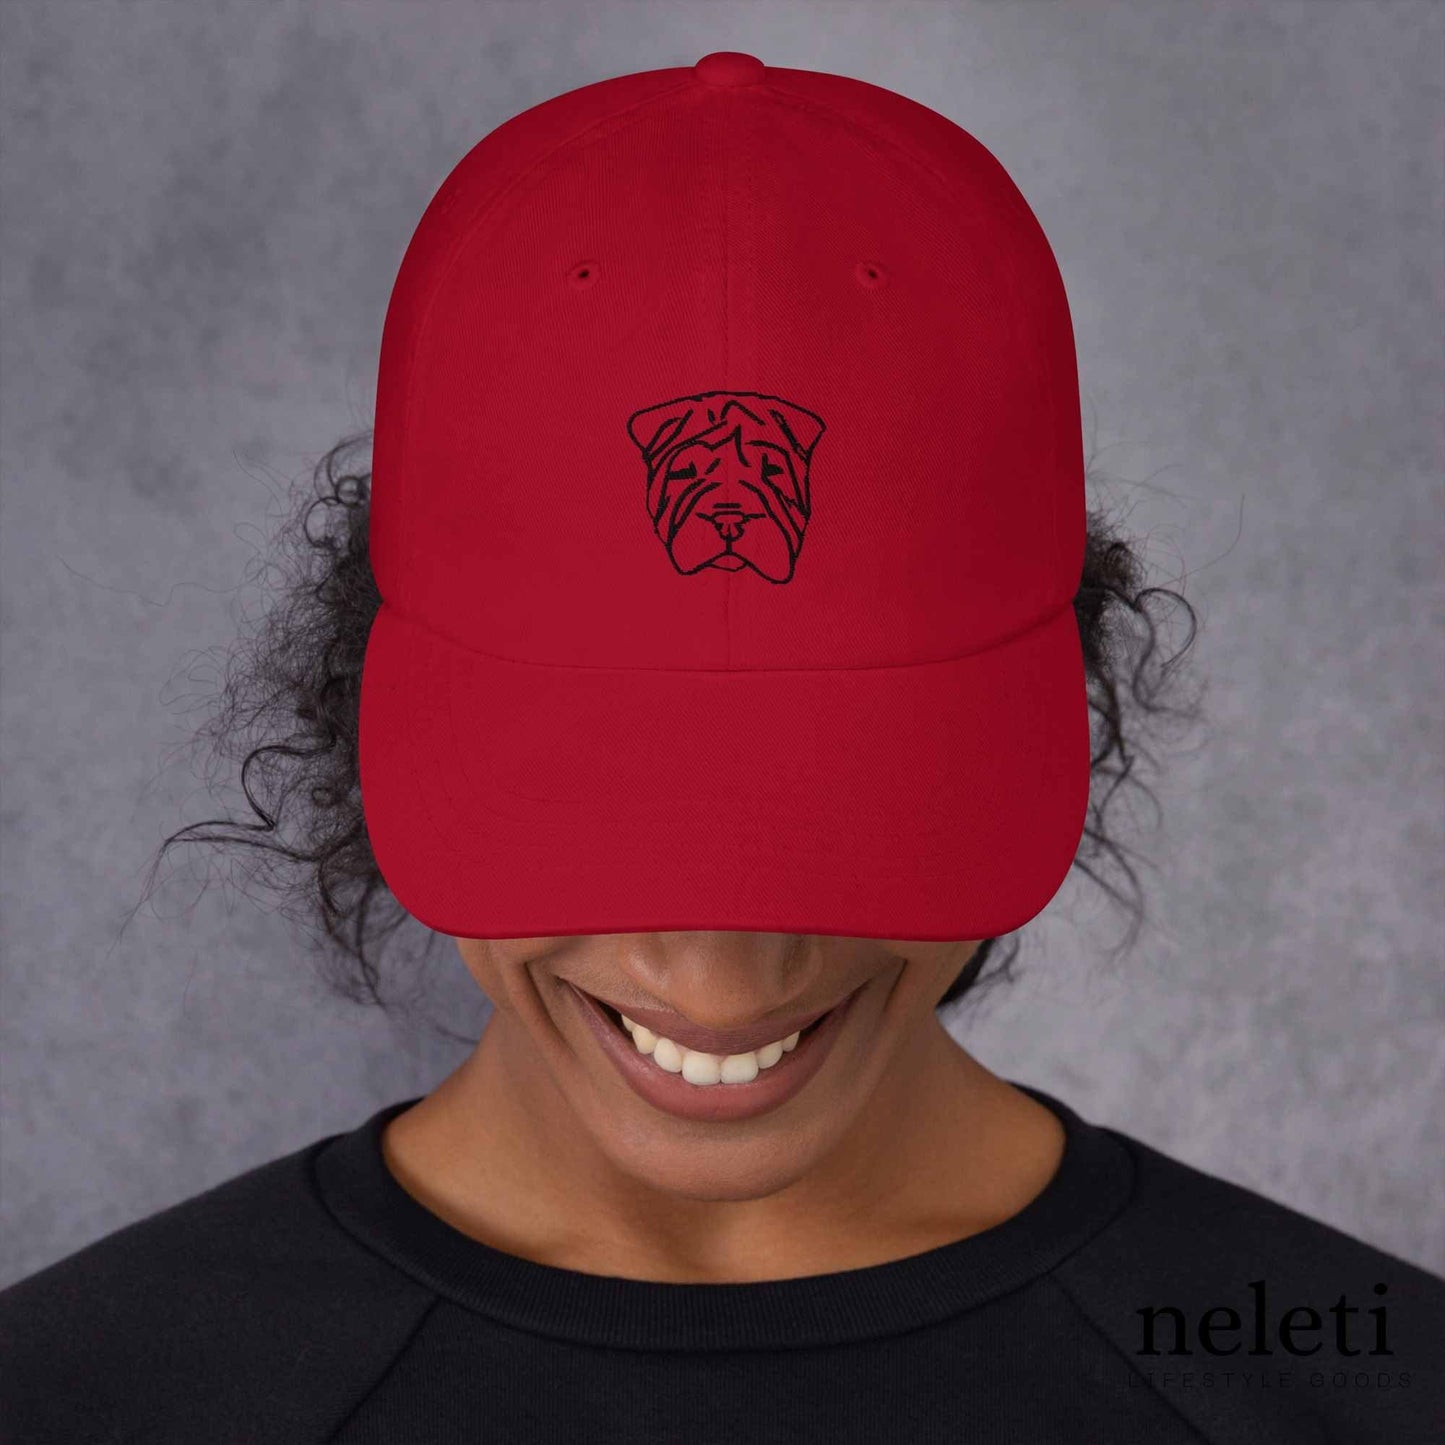 red-baseball-cap-with-embroidered-dog-face